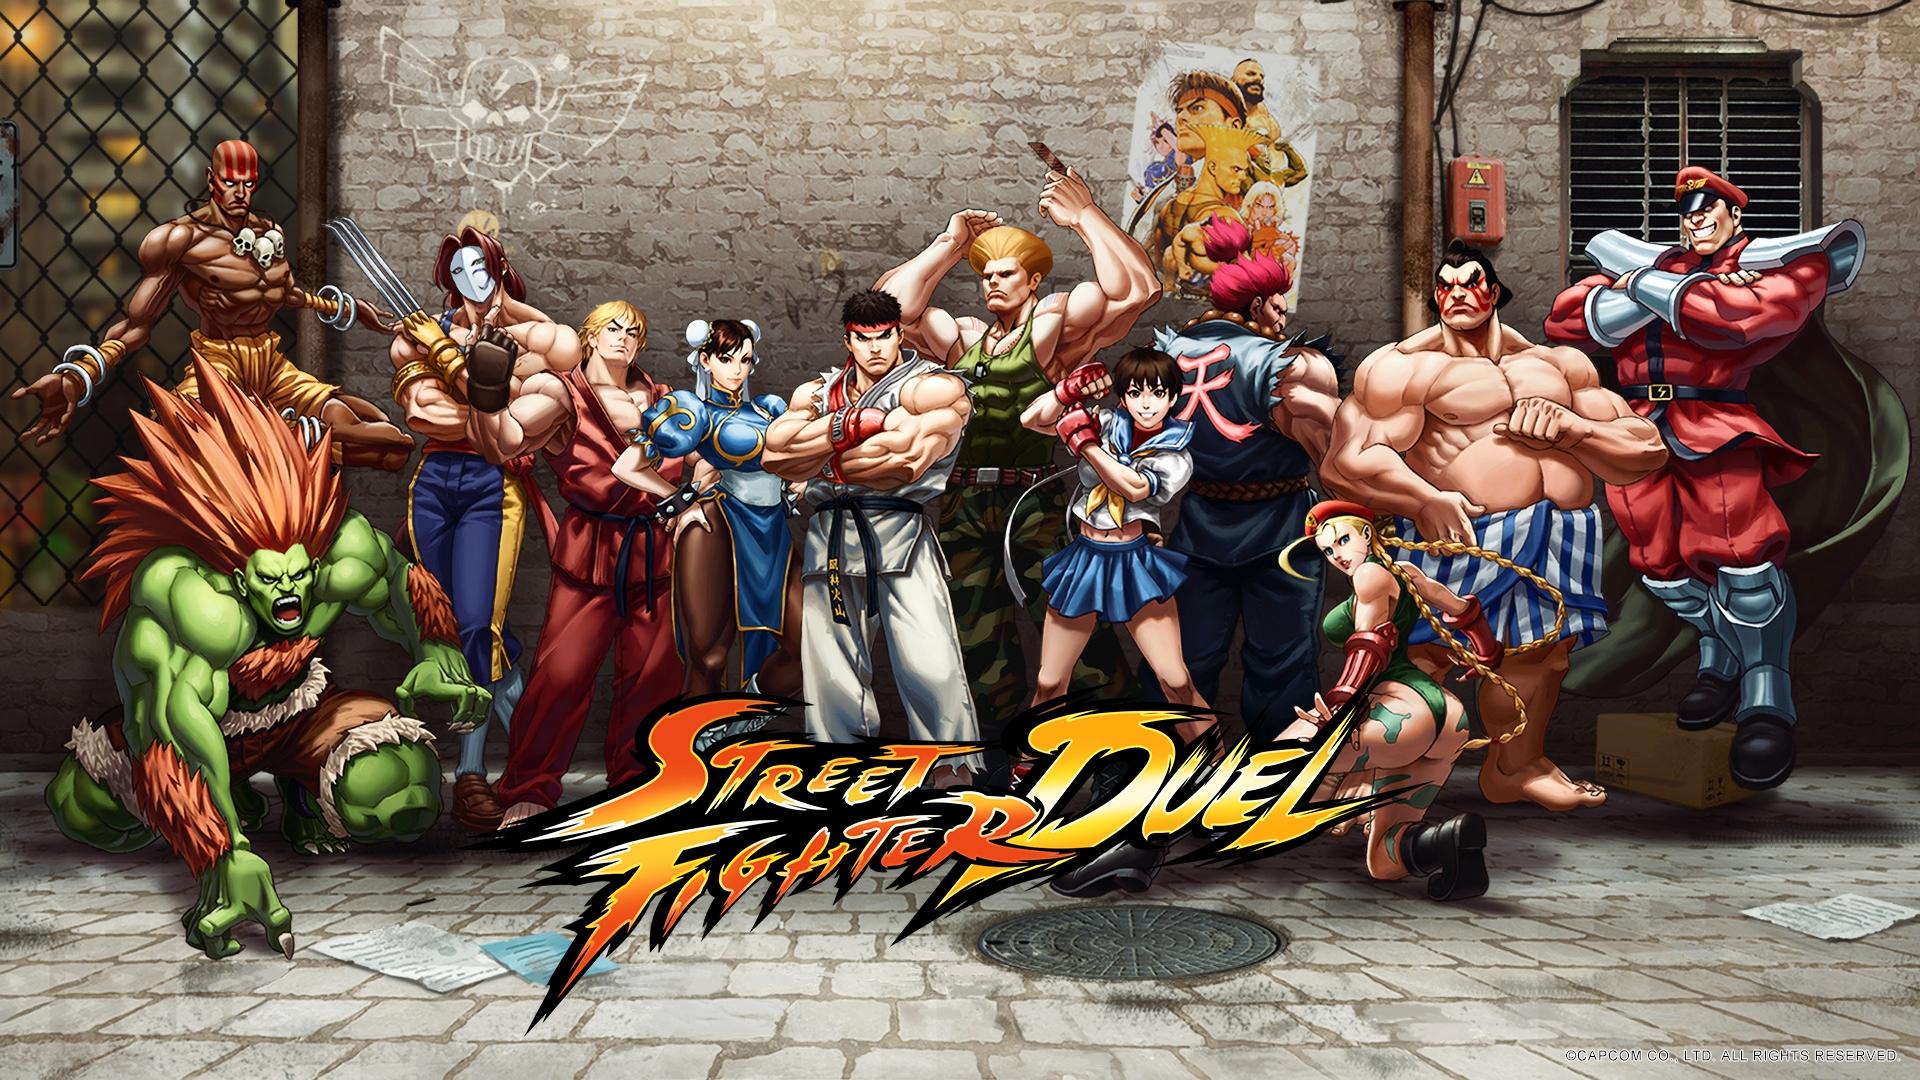 Street Fighter Duel tier list and reroll guide